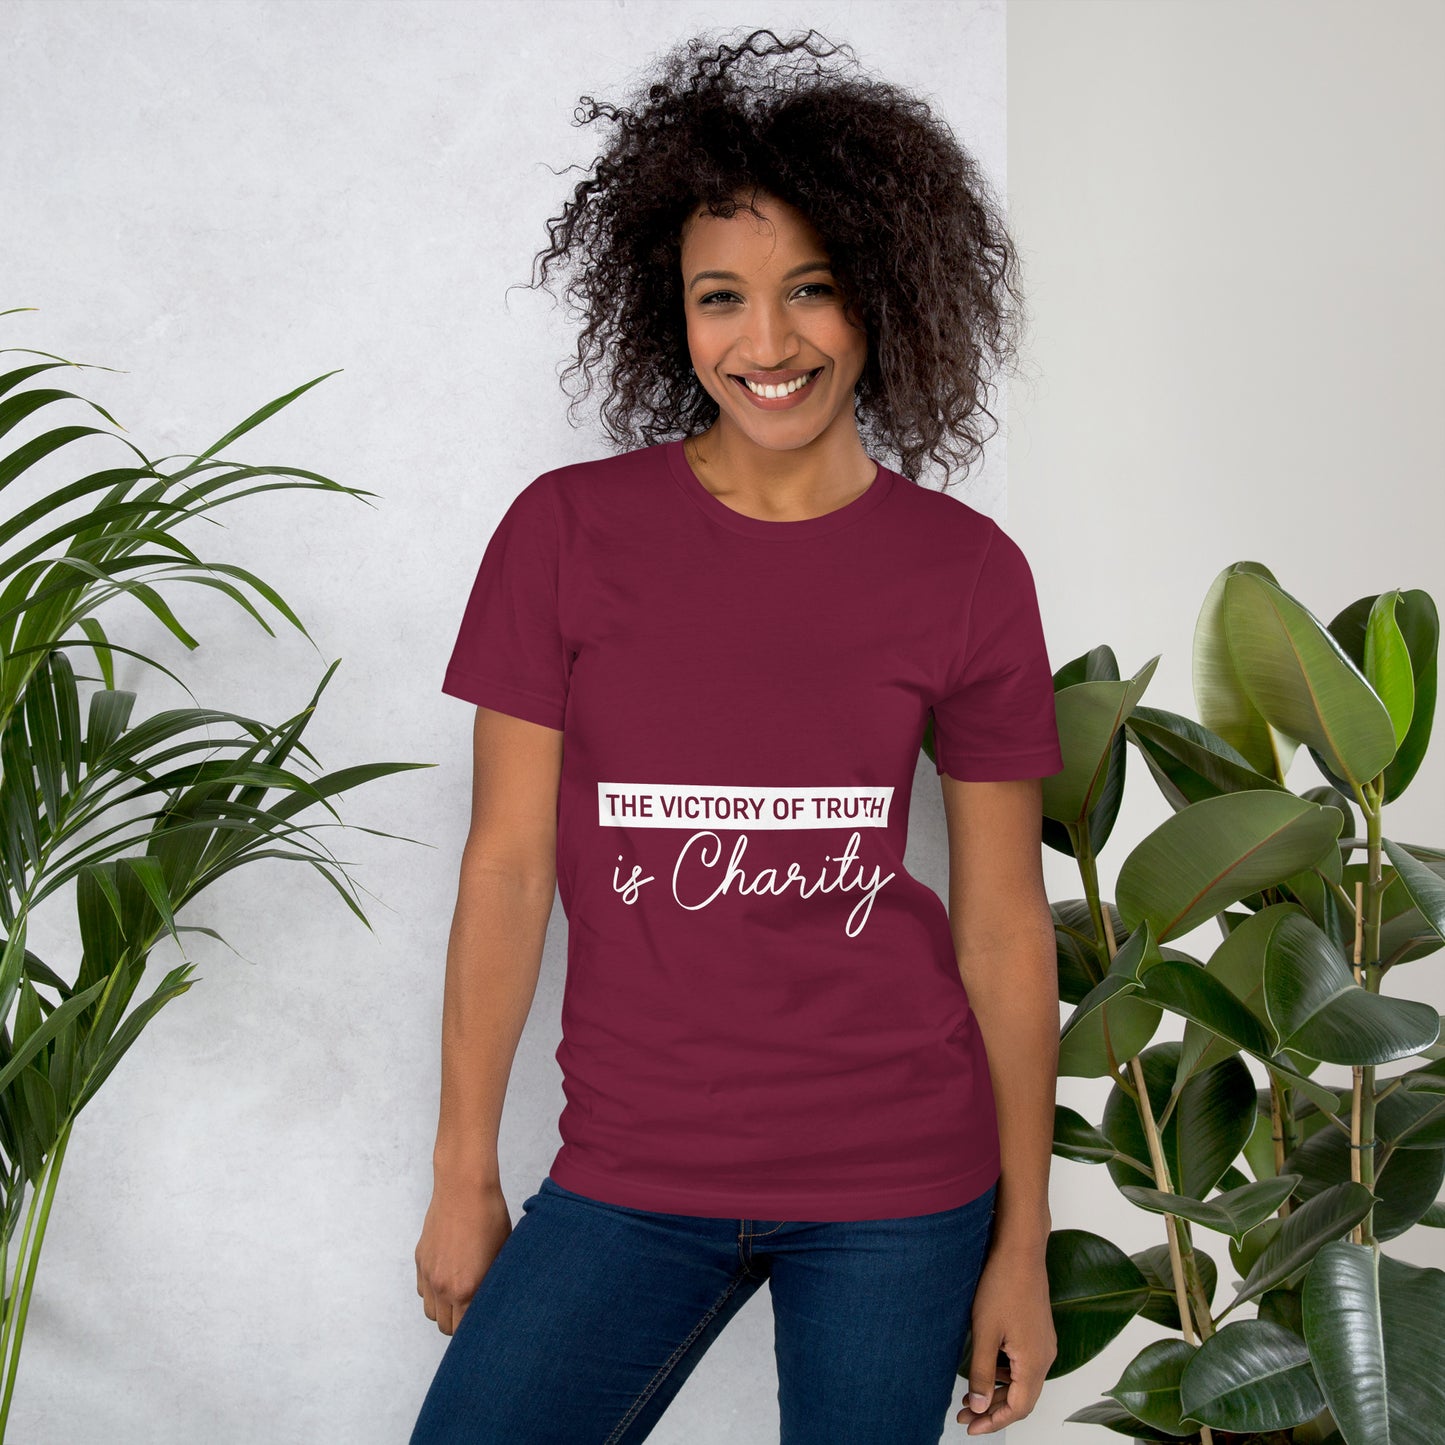 The Victory of Truth is Charity Women's Christian t-Shirt